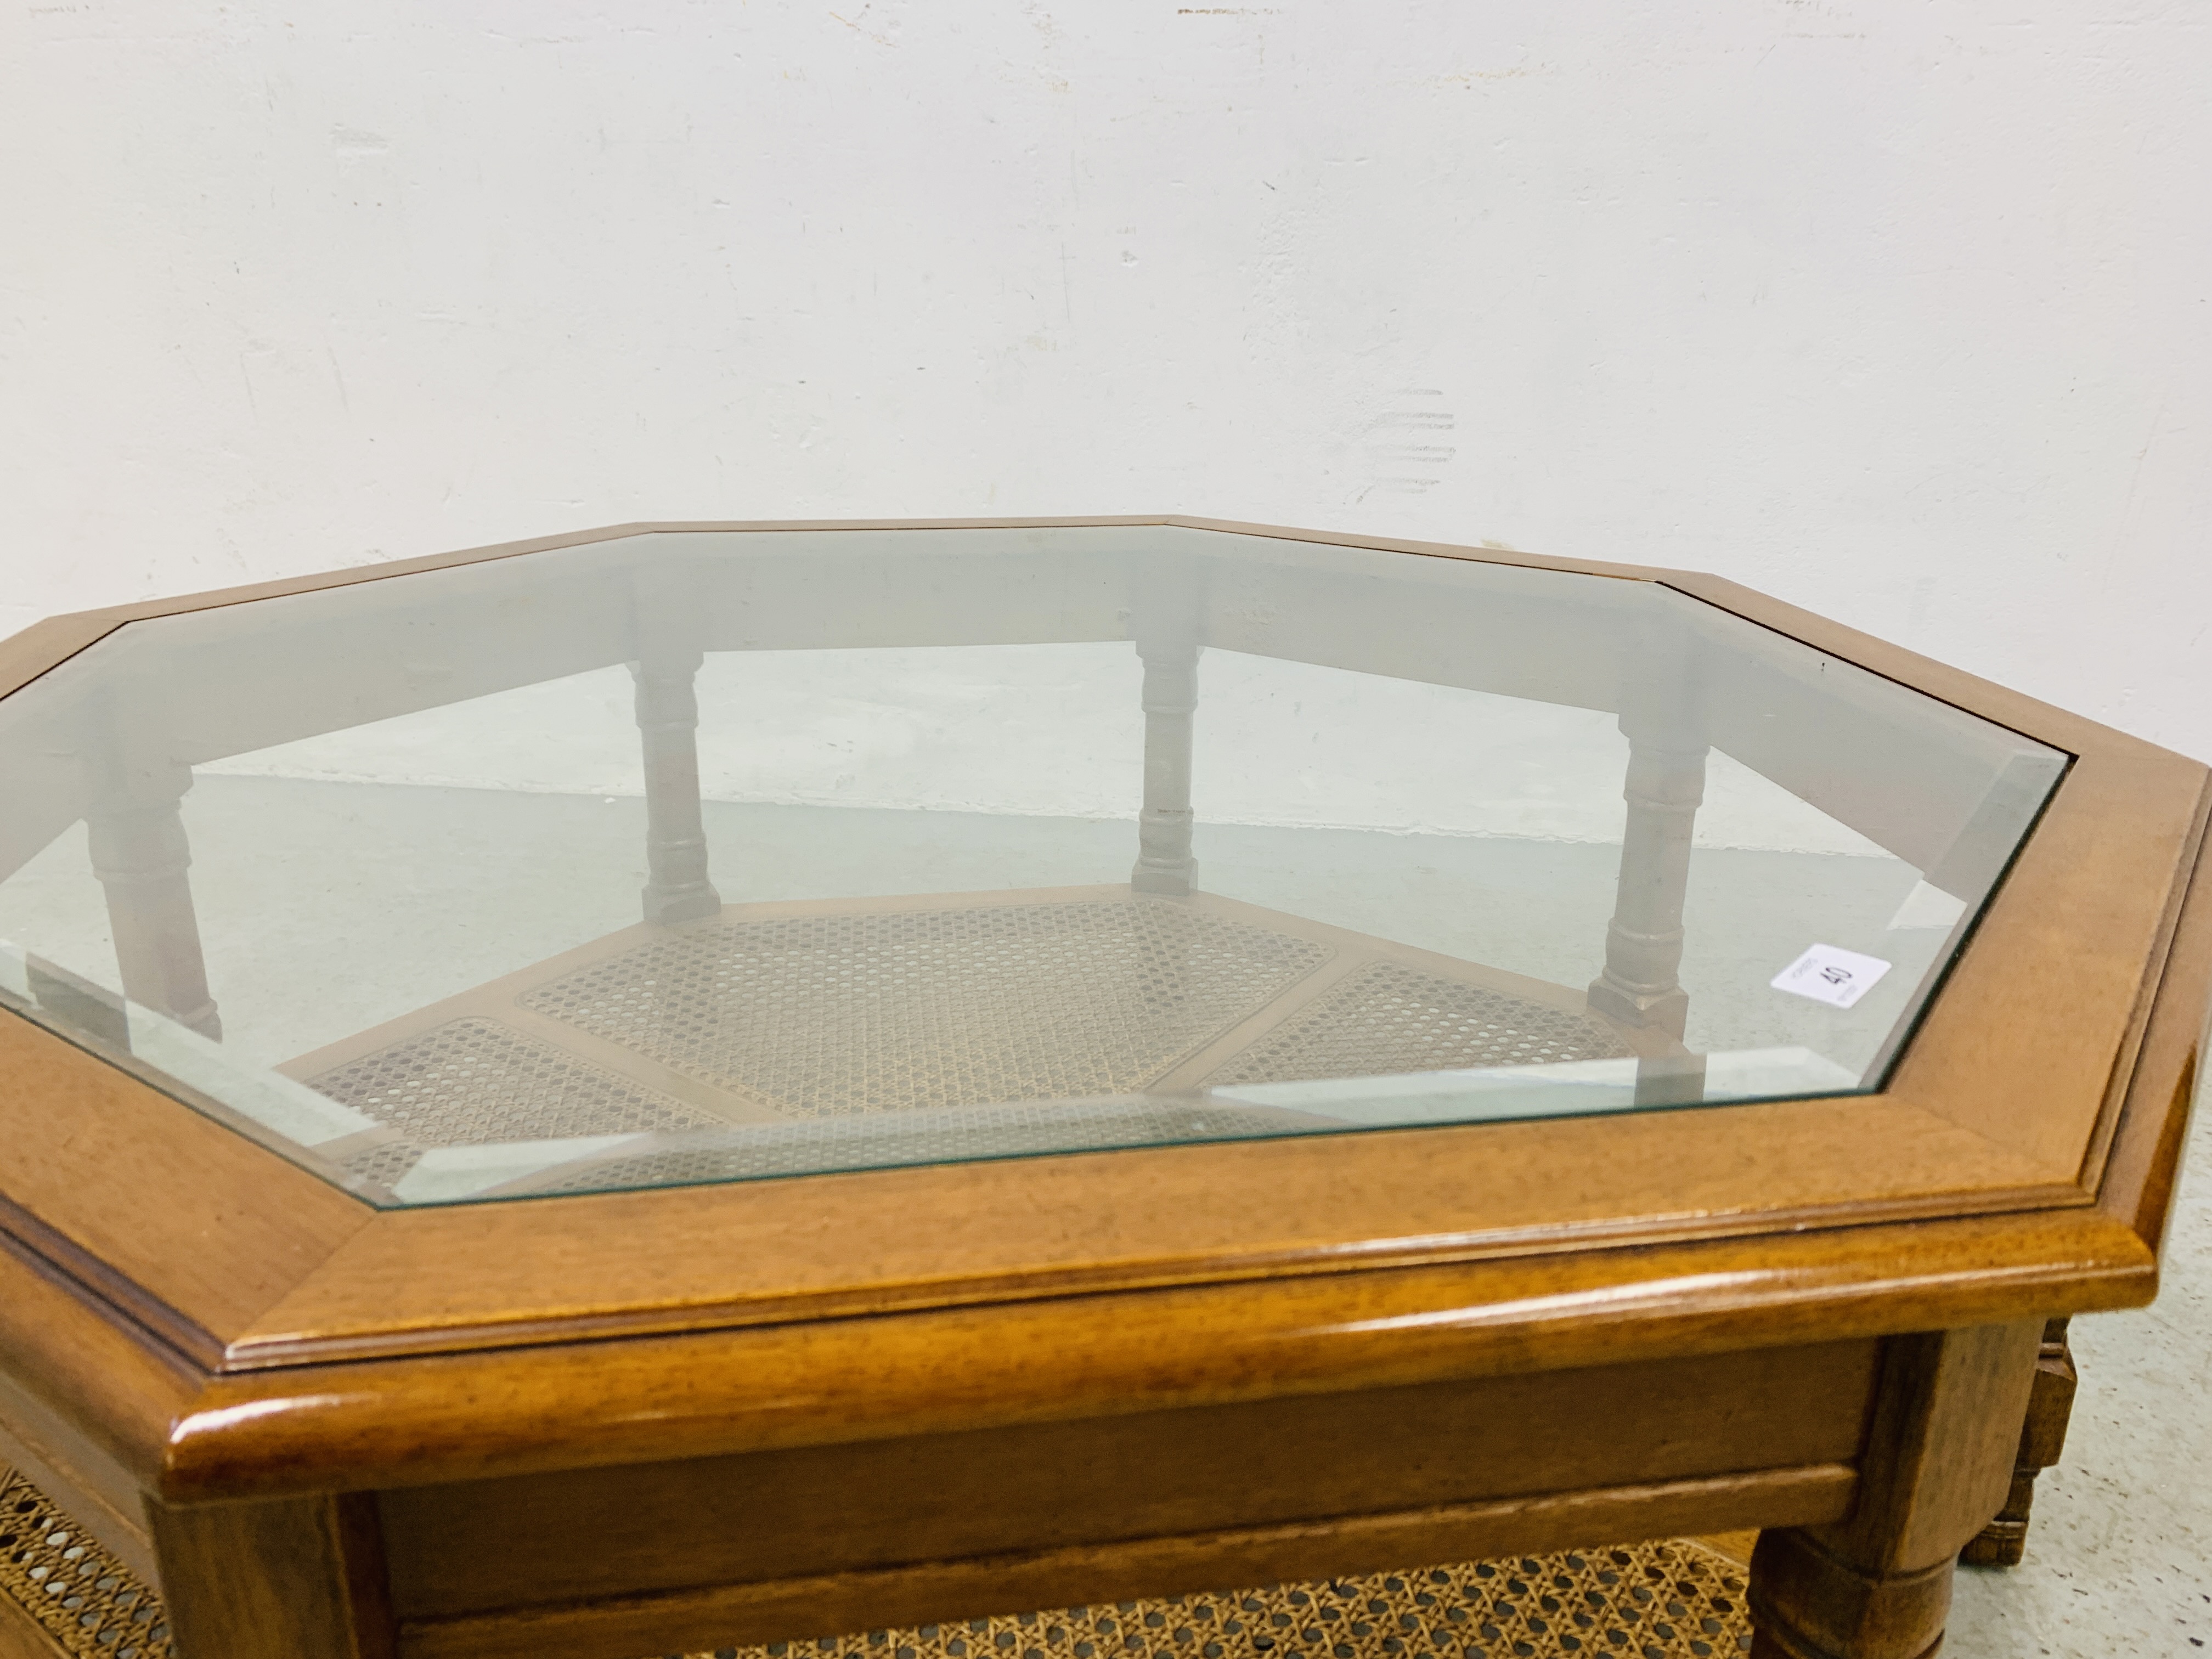 MODERN OCTAGON GLAZED COFFEE TABLE WITH RATTAN LOWER TIER - W 96CM. D 96CM. H 39CM. - Image 6 of 6